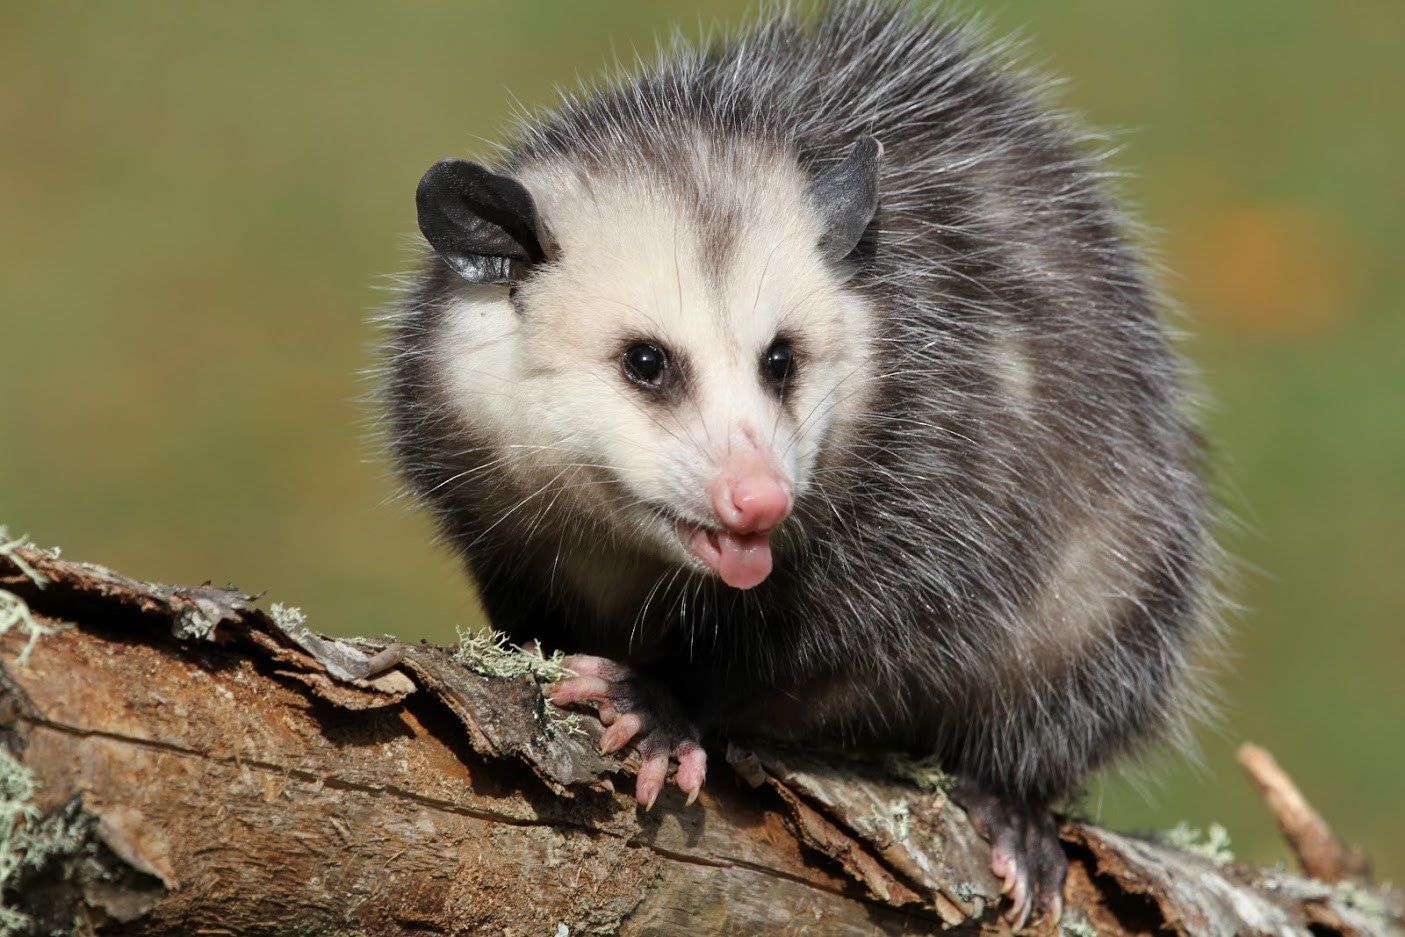 What Do You Need to Know About Opossums?